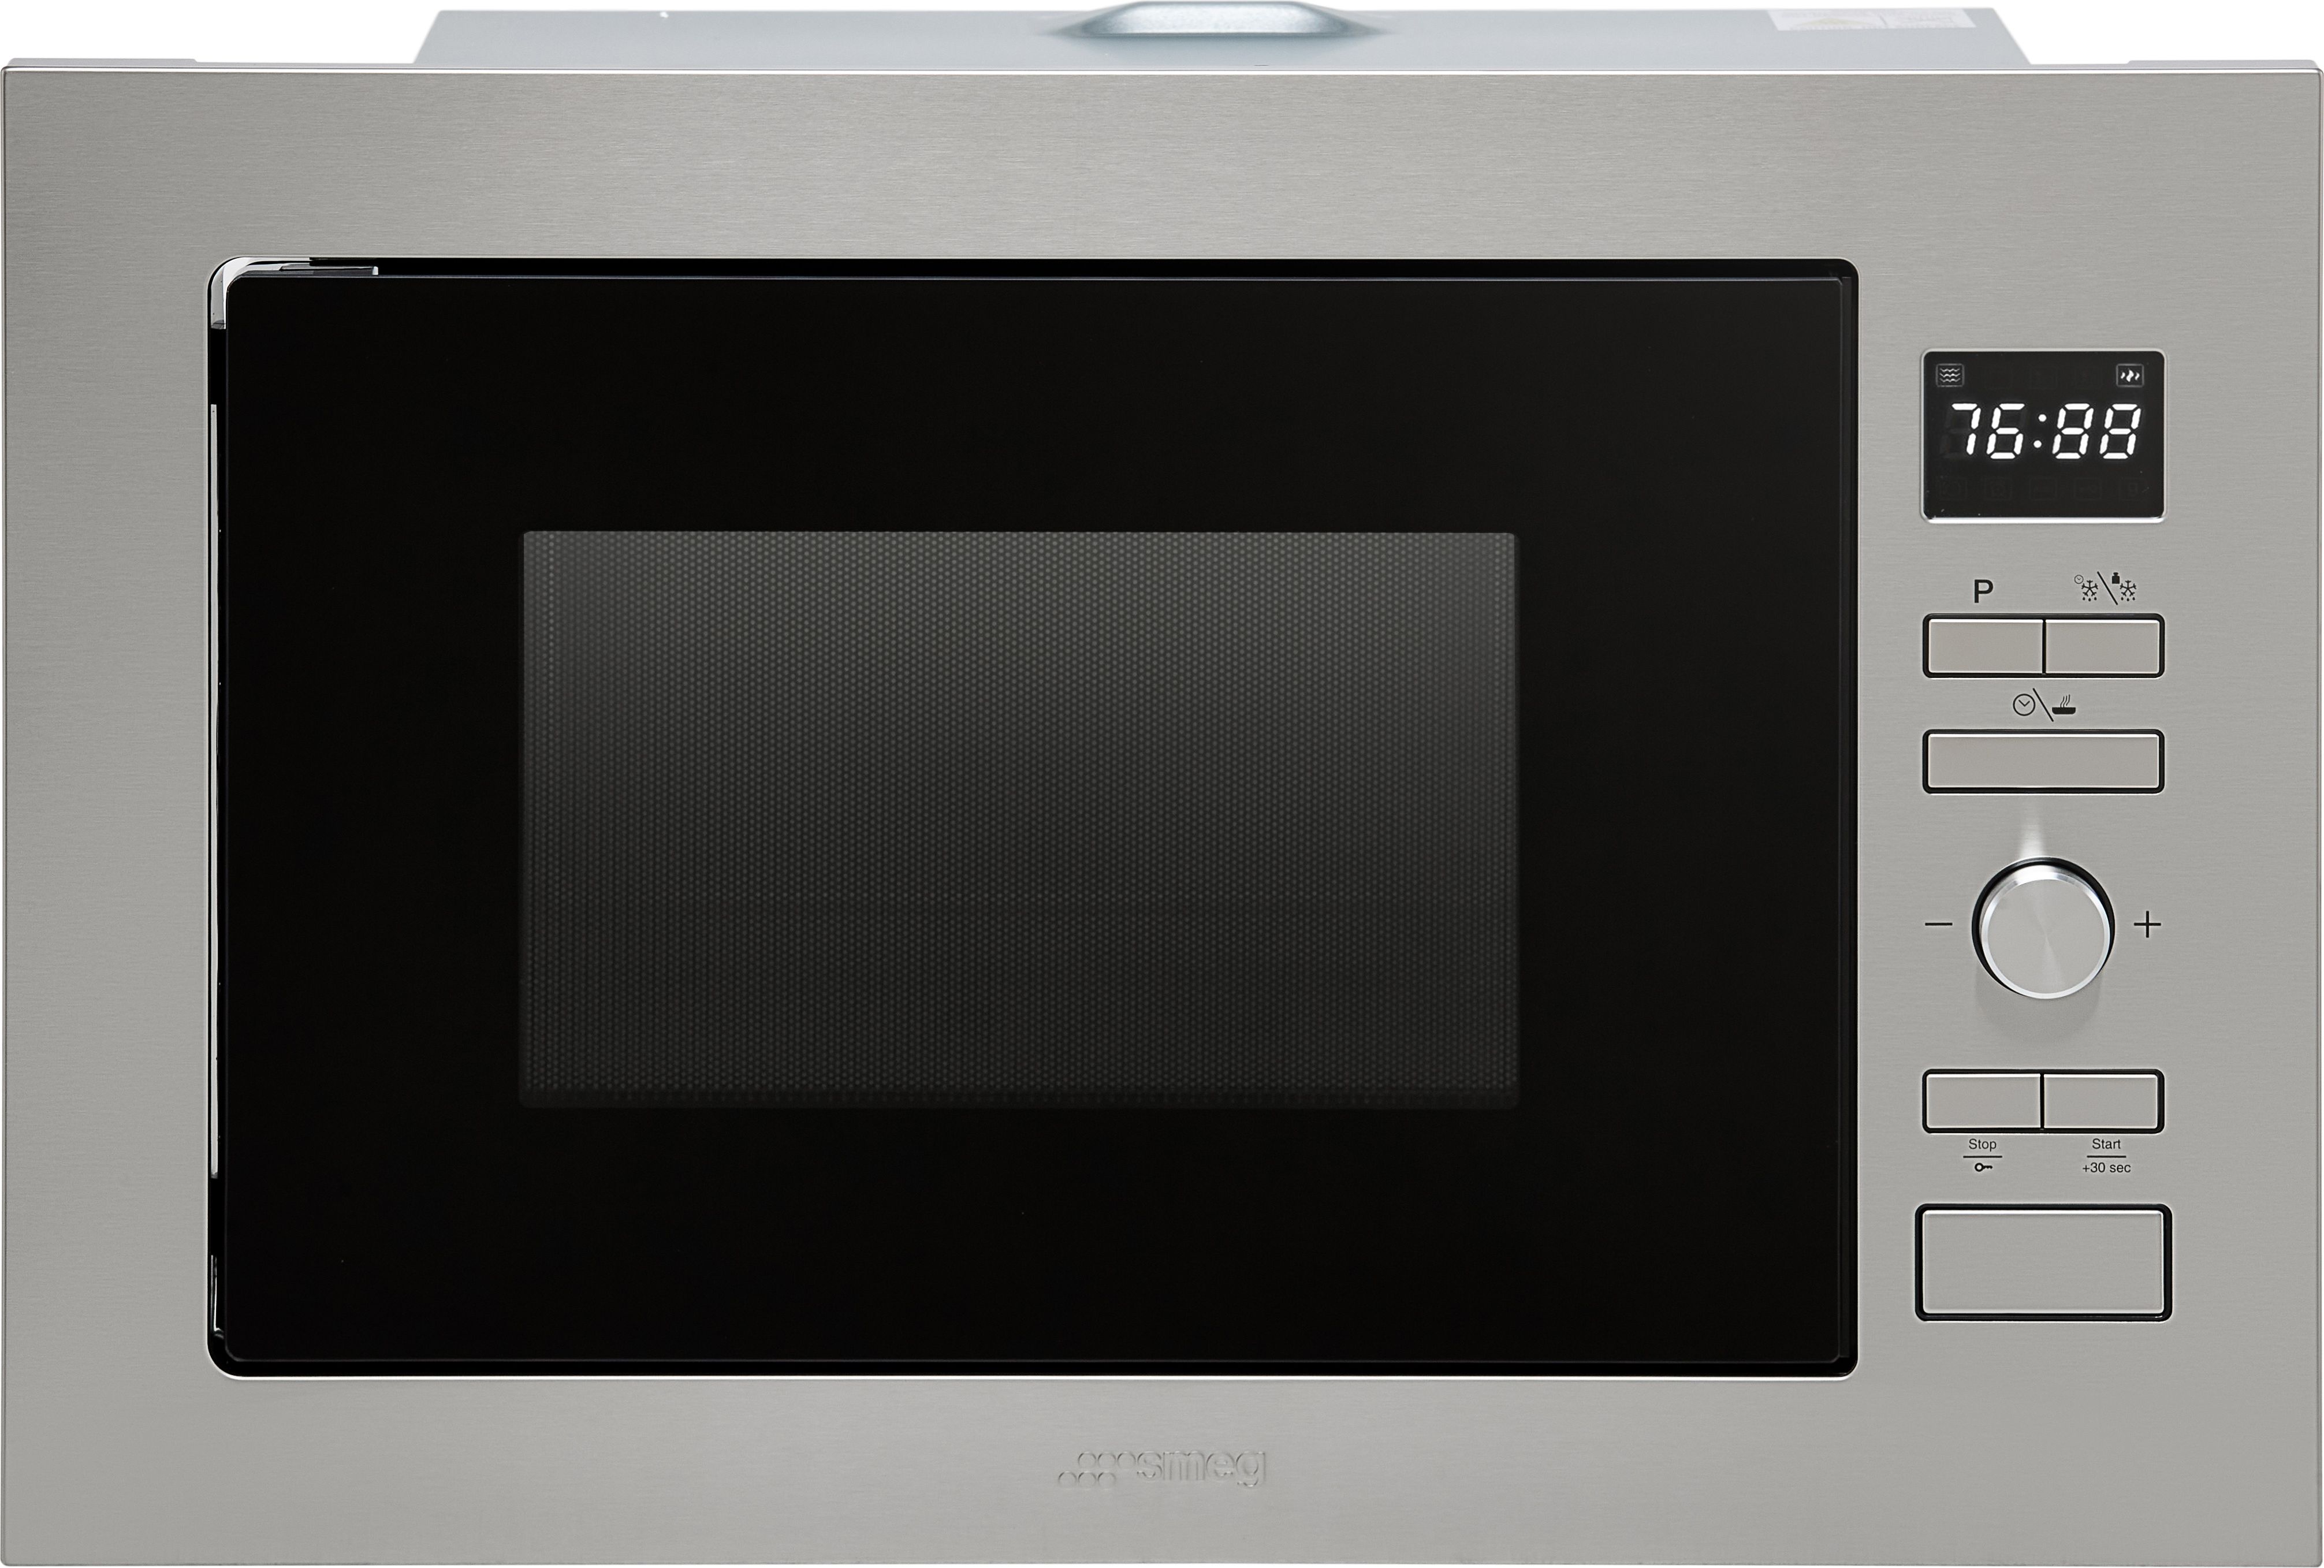 Smeg Cucina FMI425X Built In 39cm Tall Compact Microwave - Stainless Steel, Stainless Steel